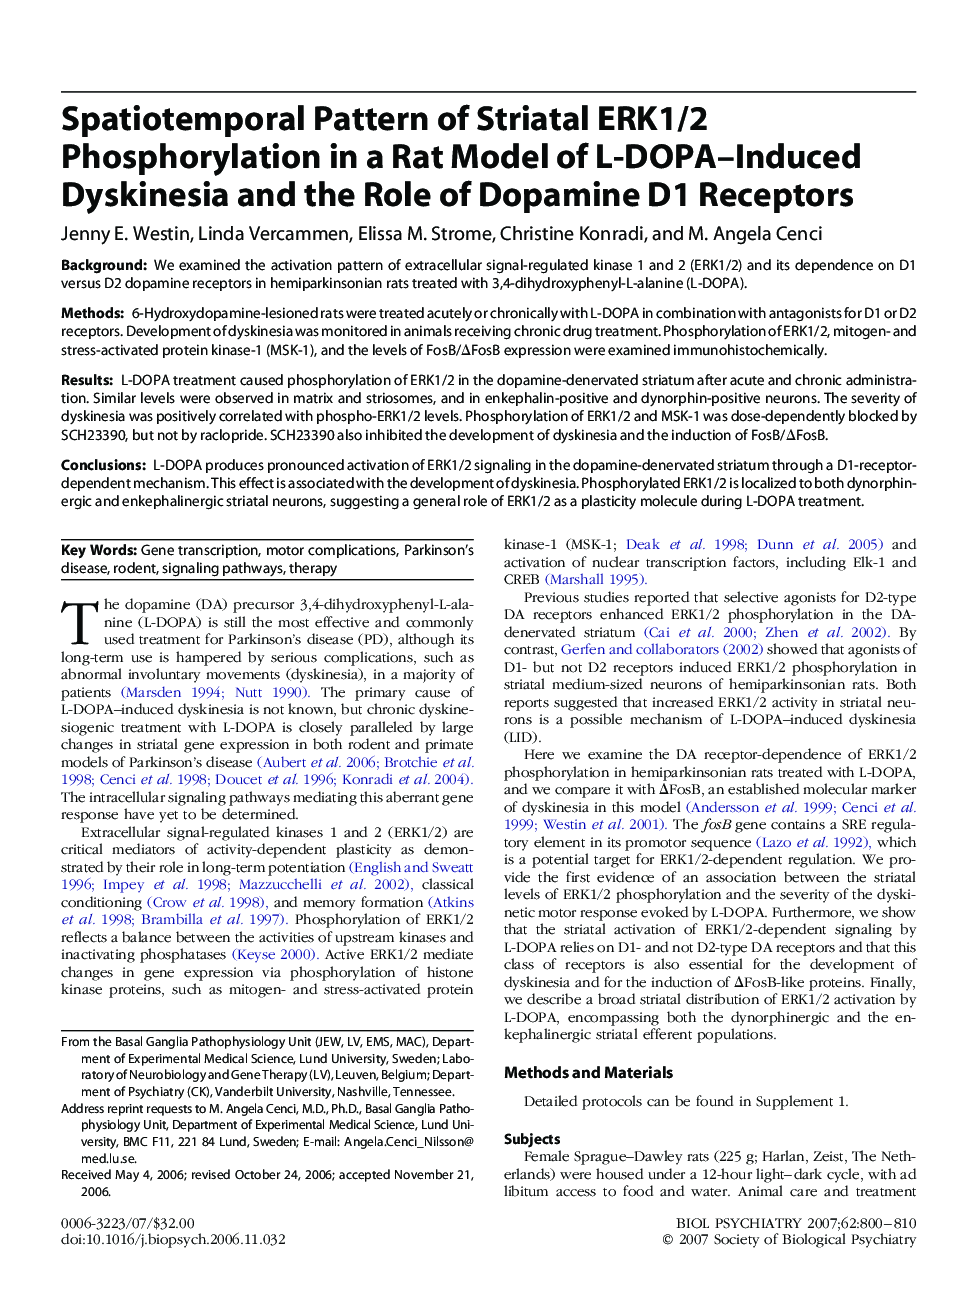 Spatiotemporal Pattern of Striatal ERK1/2 Phosphorylation in a Rat Model of L-DOPA–Induced Dyskinesia and the Role of Dopamine D1 Receptors